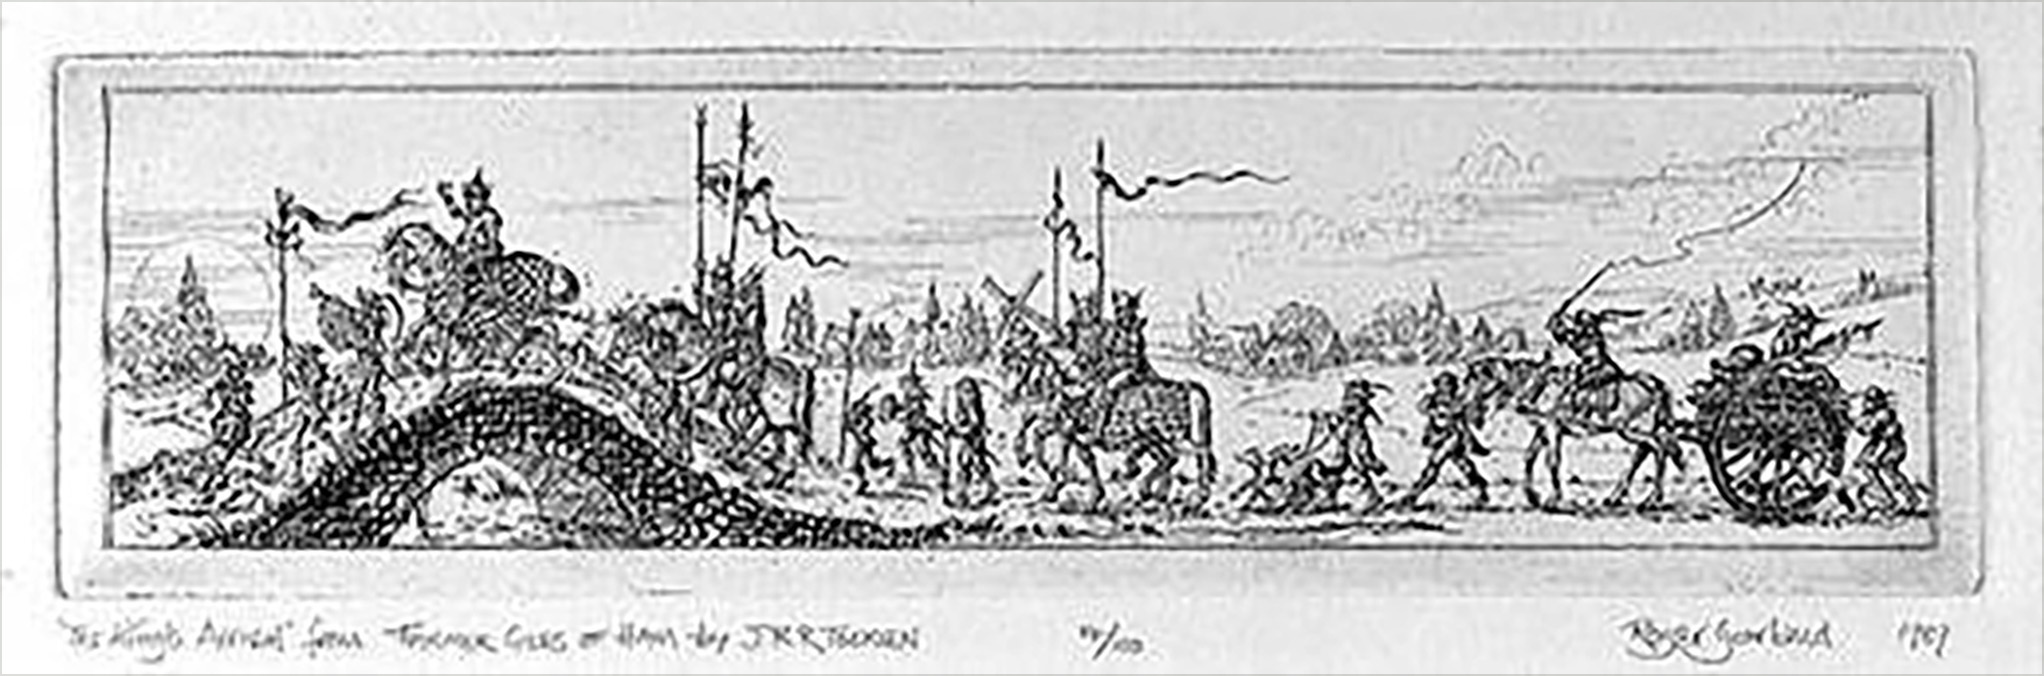 <titletext>

<strong>46. The King’s Arrival from Farmer Giles of Ham</strong>

</titletext>

<br/><br/>

Copper etching, 1989, image size 75 x 274 mm.<span class="ngViews">2 views</span>